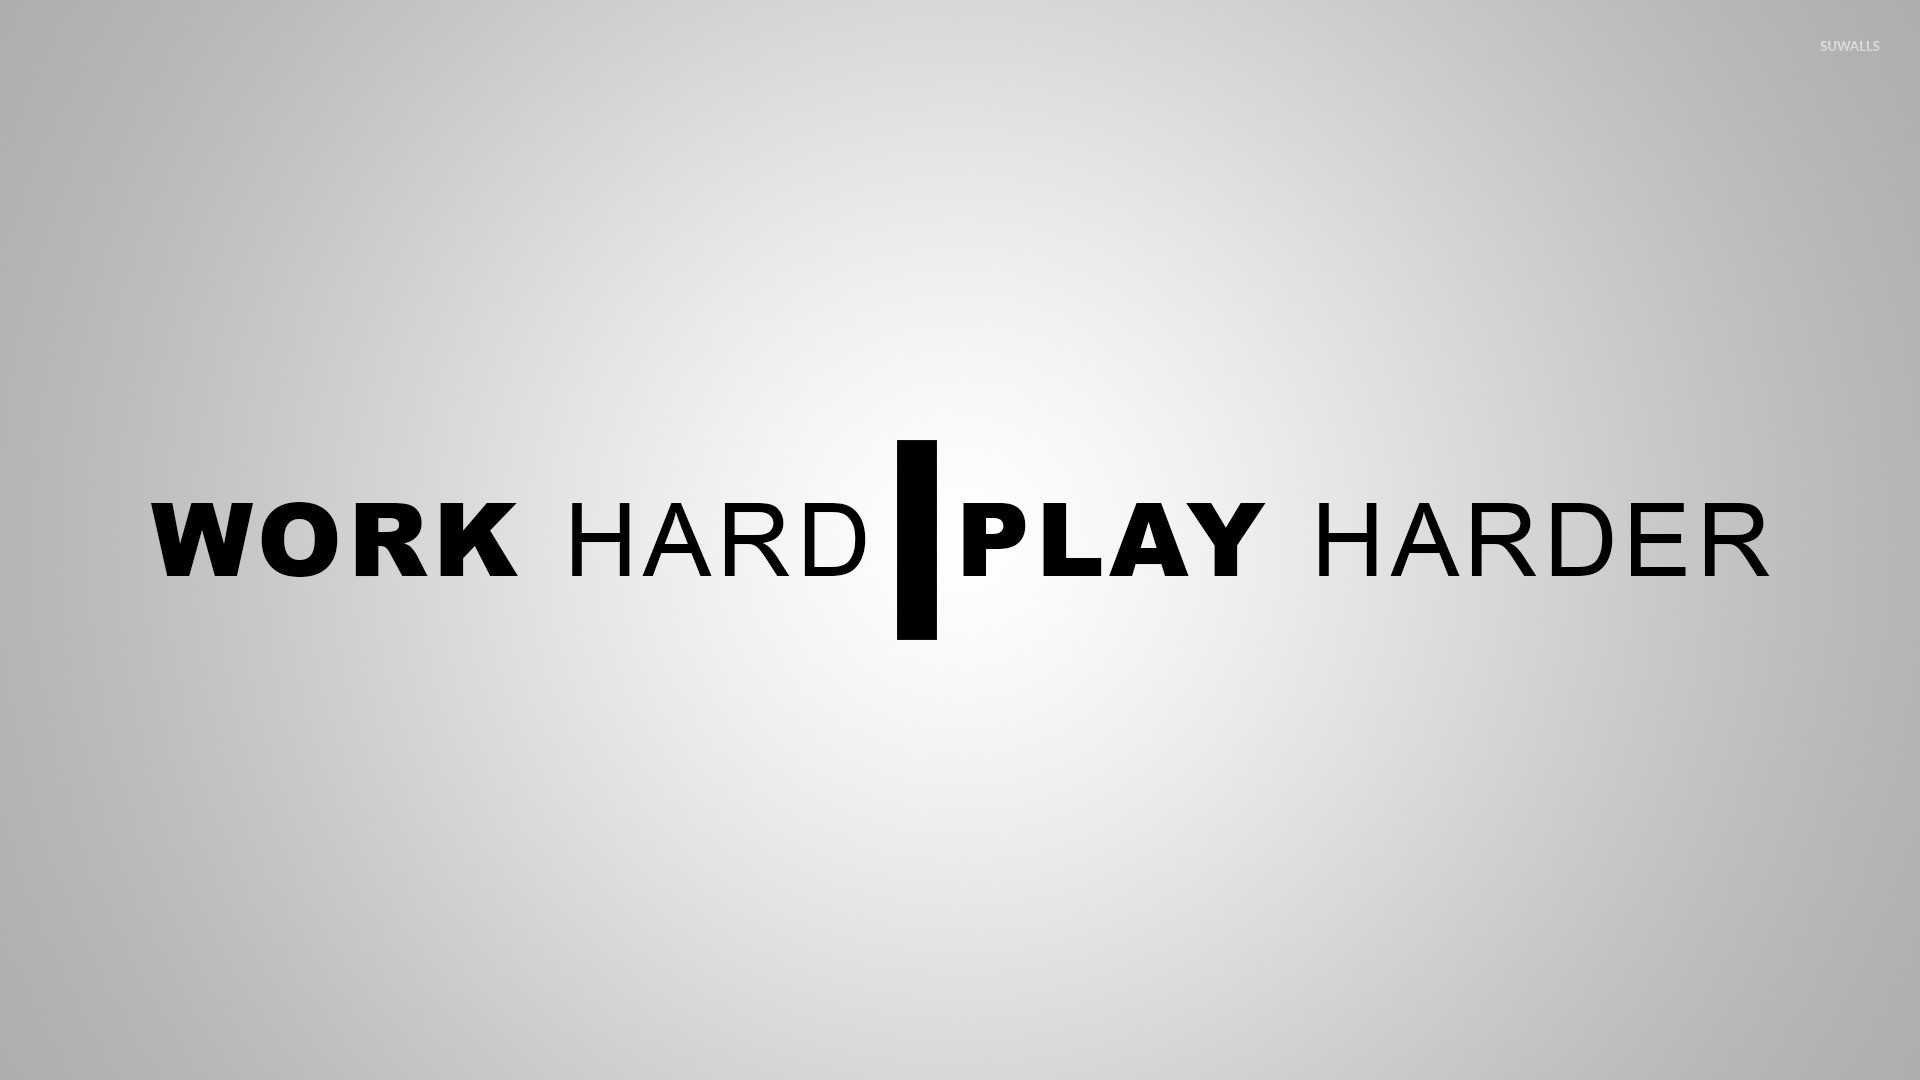 1920x1080 Work Hard play harder wallpaper Typography wallpapers 26436 